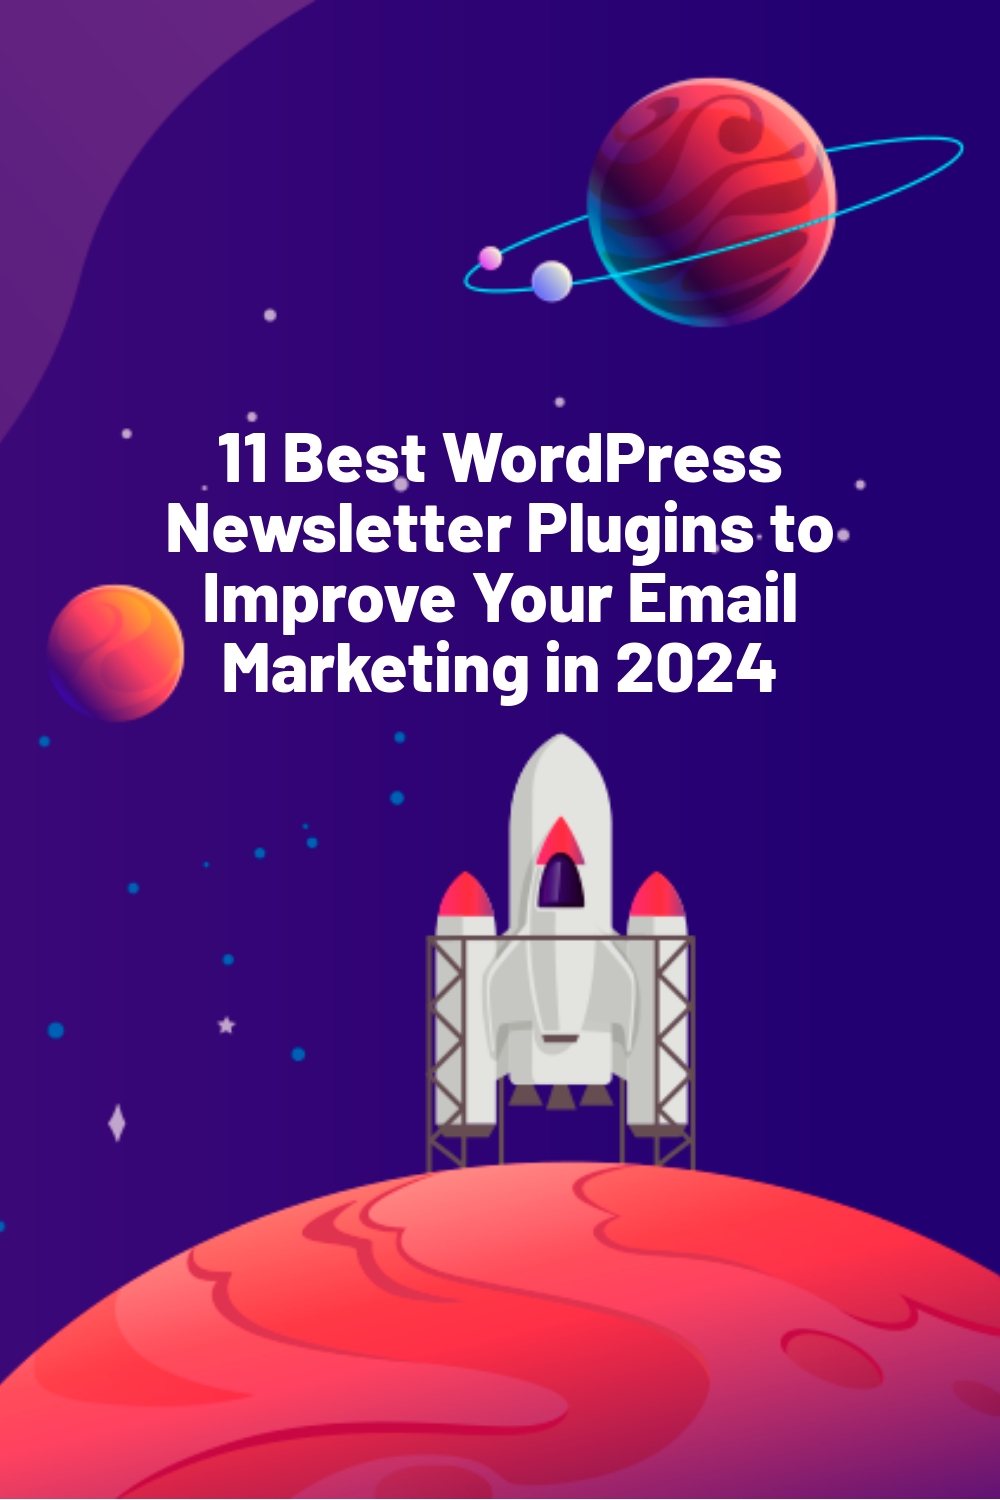 11 Best WordPress Newsletter Plugins to Improve Your Email Marketing in 2024